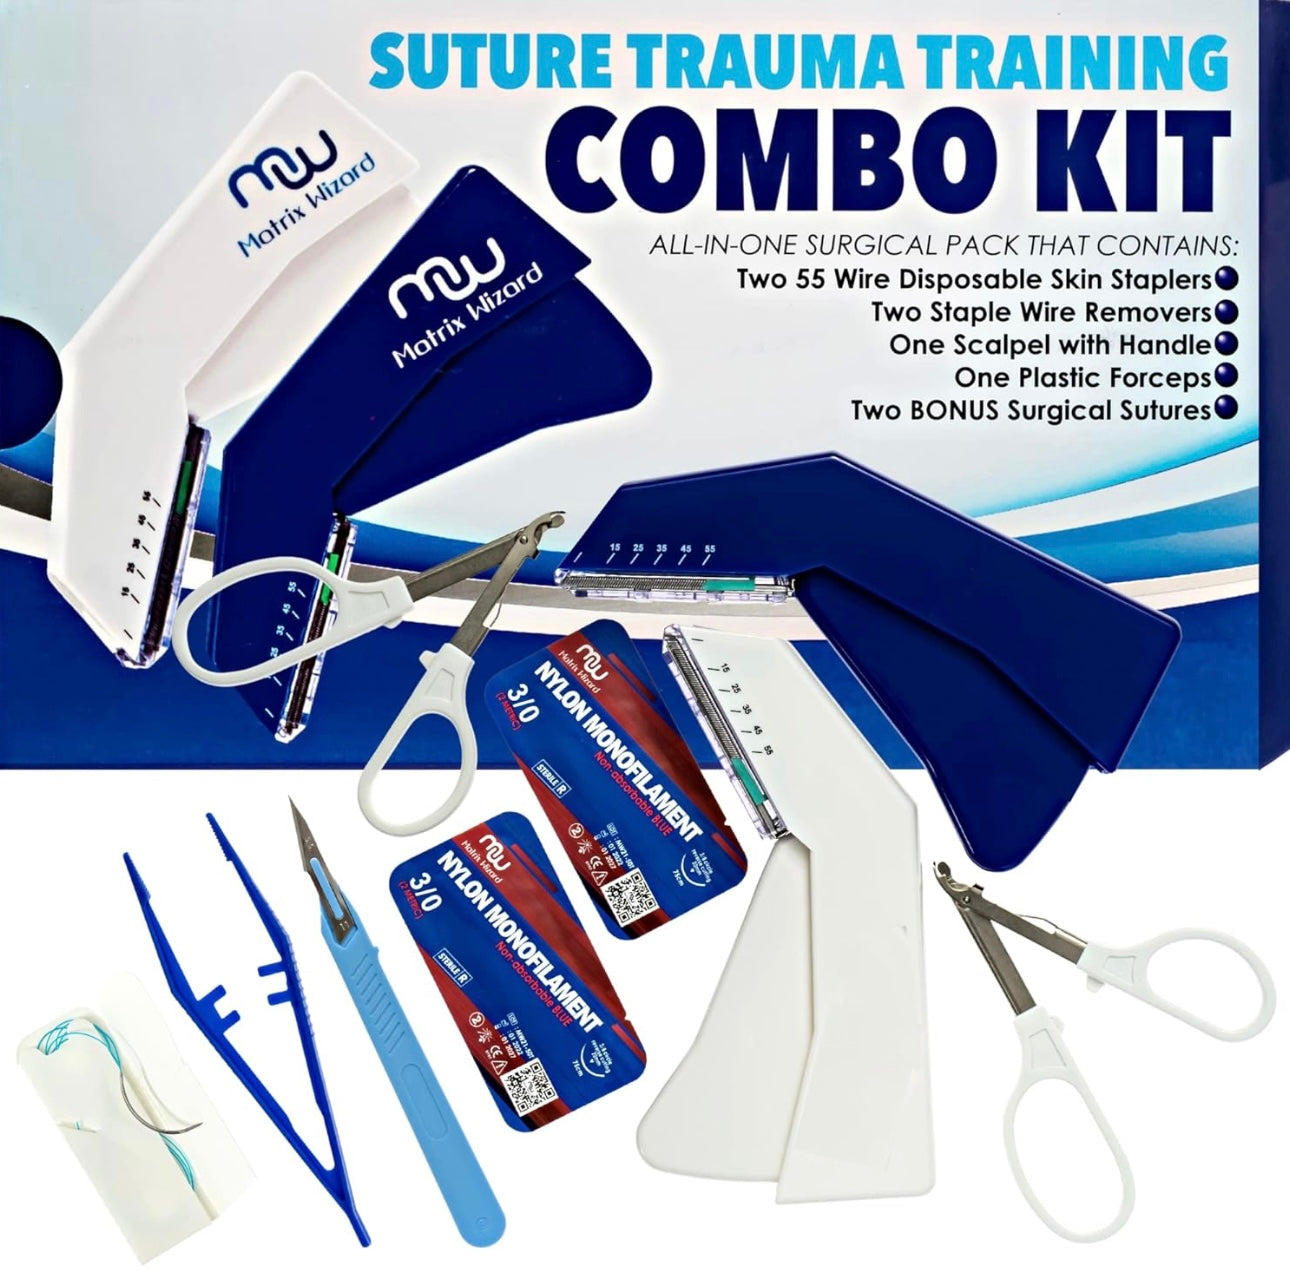 Sterile Suture Tool Kit - First Aid Field Emergency Practice Suture Thread with Needle, Disposable Clinical Rotation Stapler Training, Wound Closure Training Kit, Taxidermy, Anatomy Vet Use